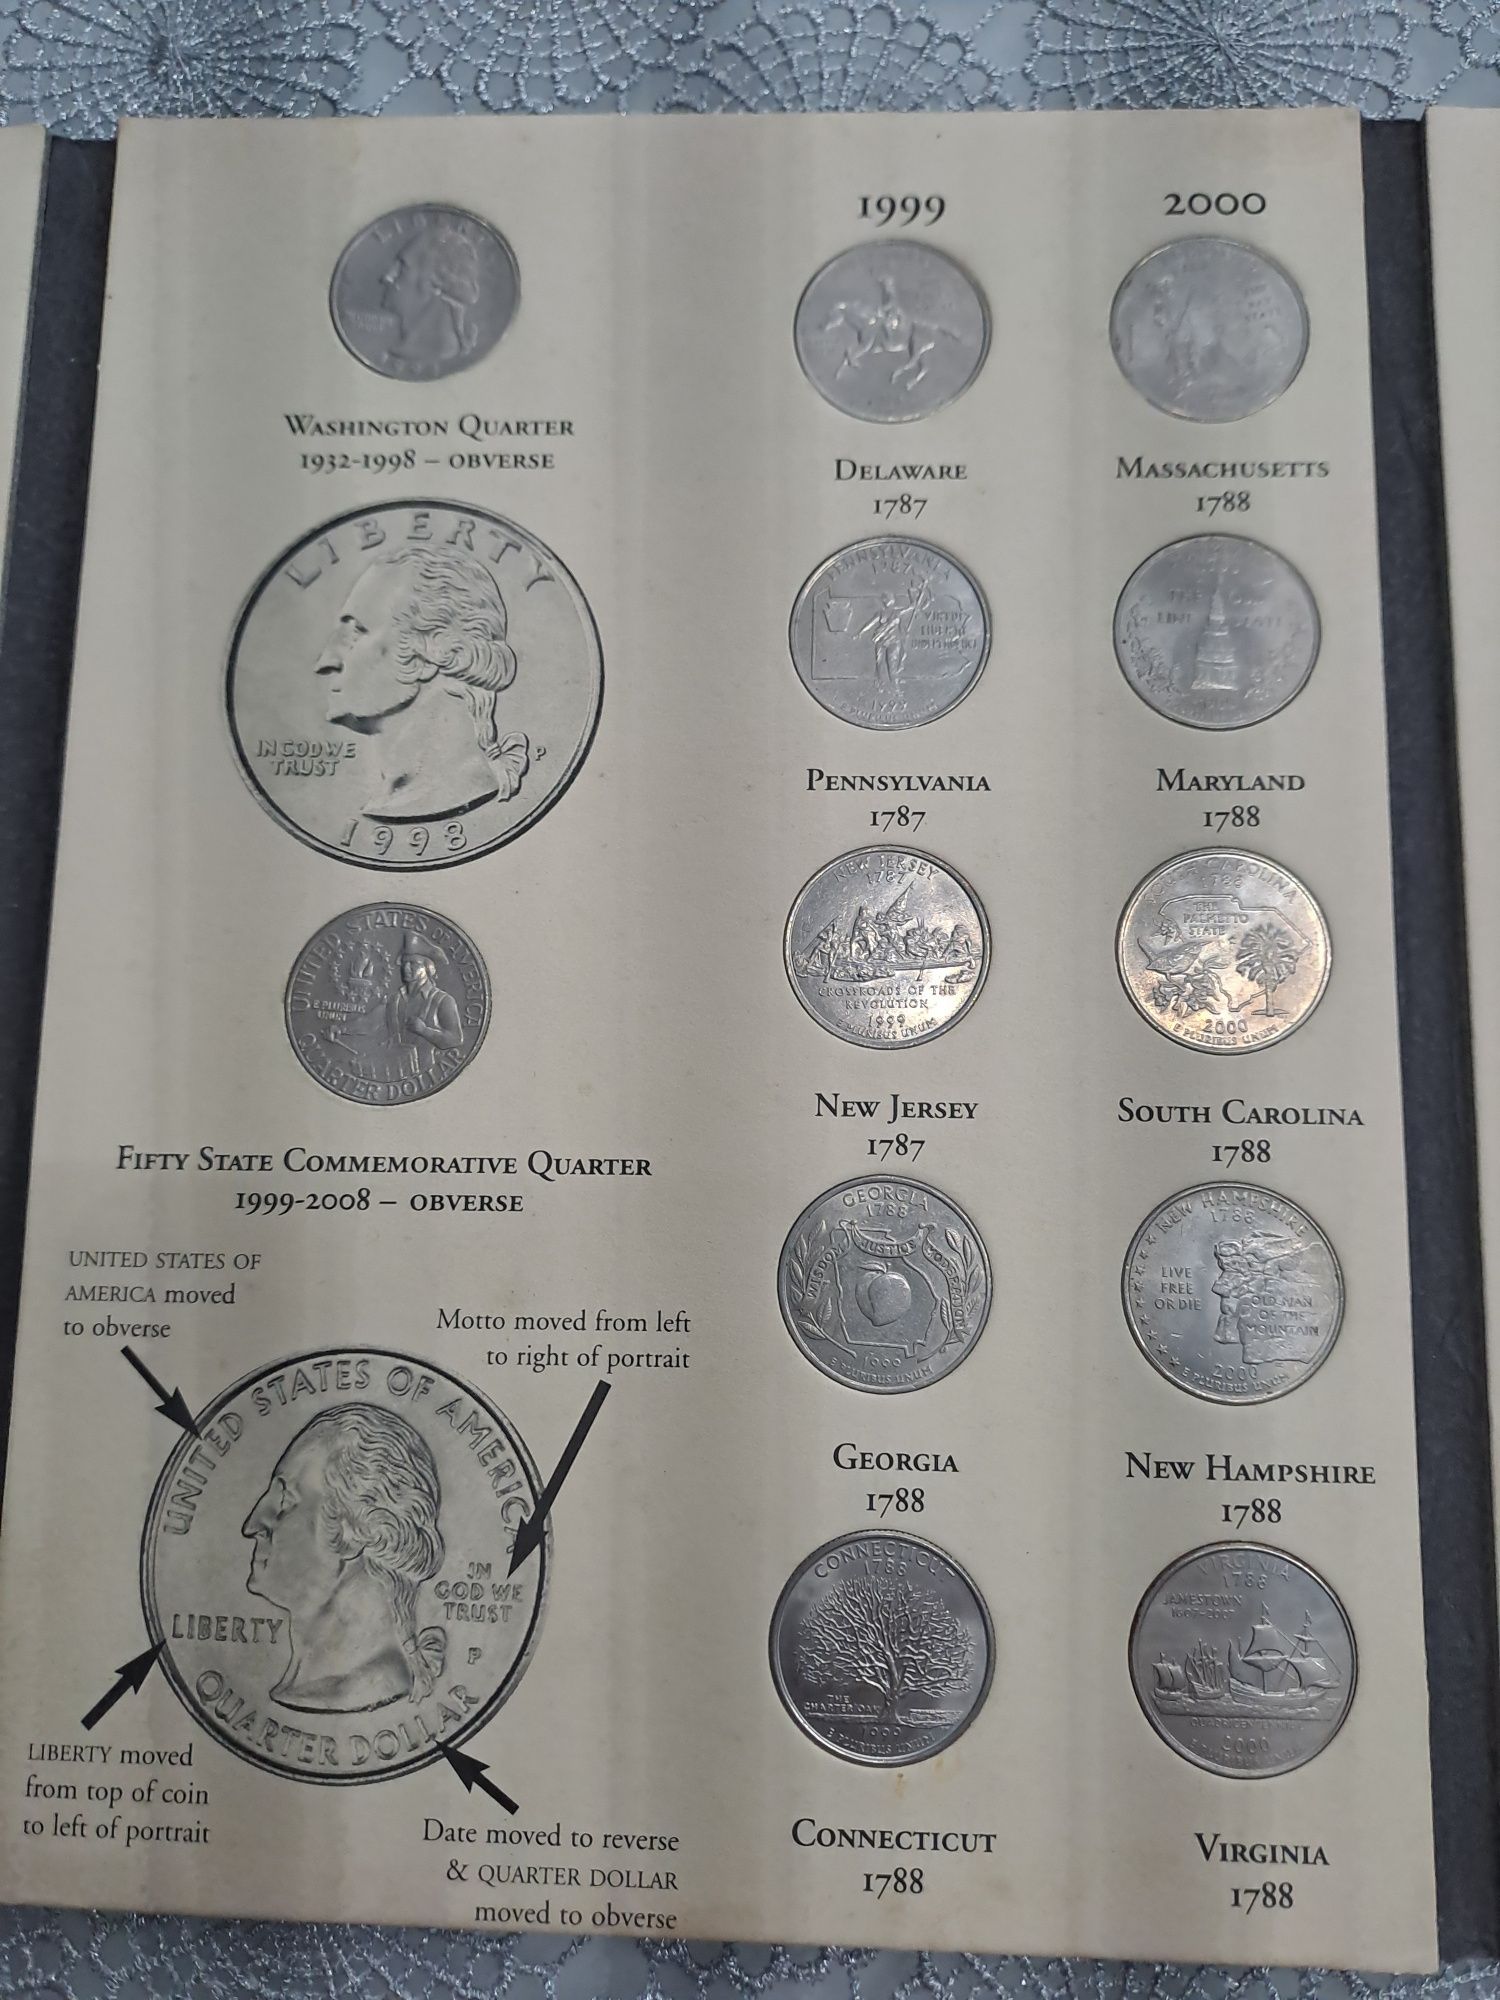 Fifty State Commemorative Quarters 1999